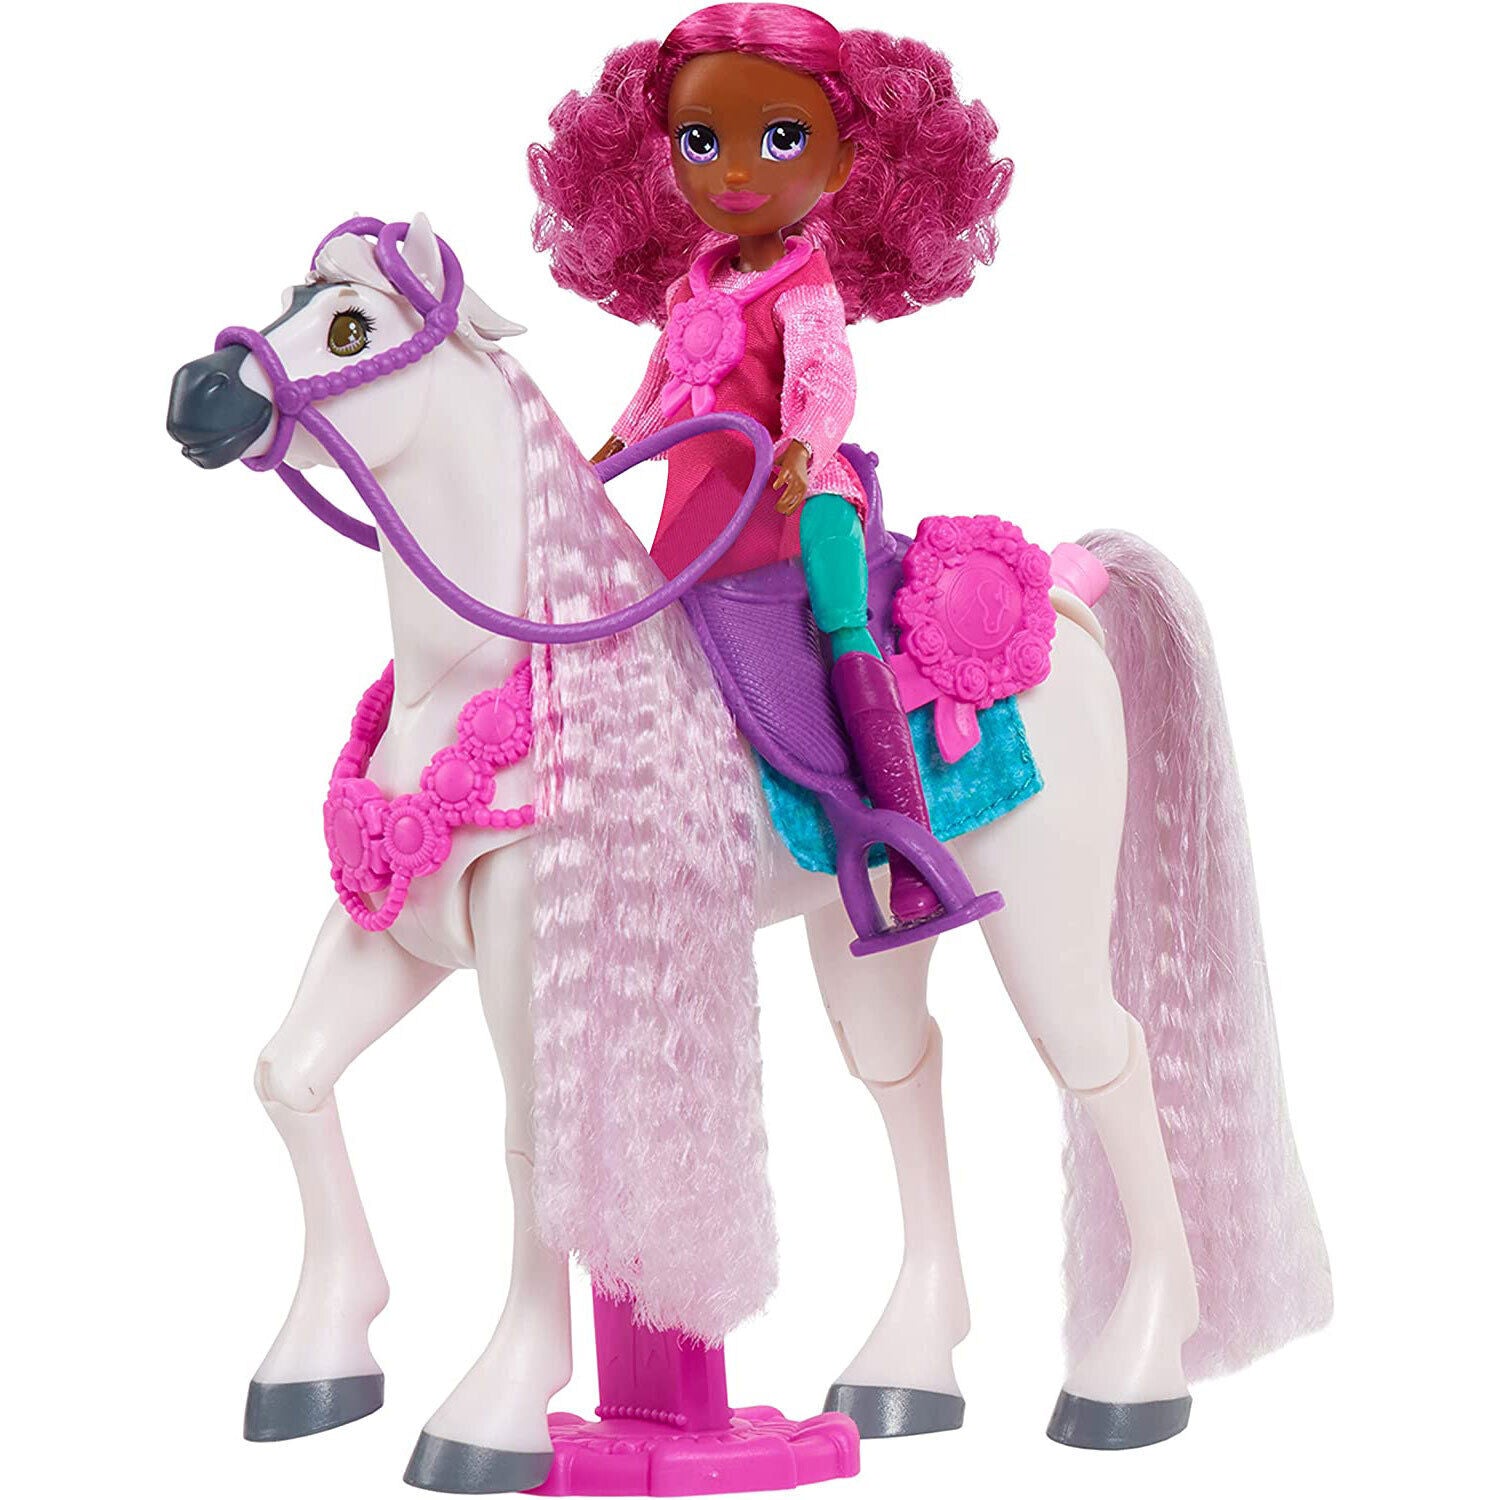 Winner’s Stable Doll and Horse 11-Piece Set - Madison and Huntley